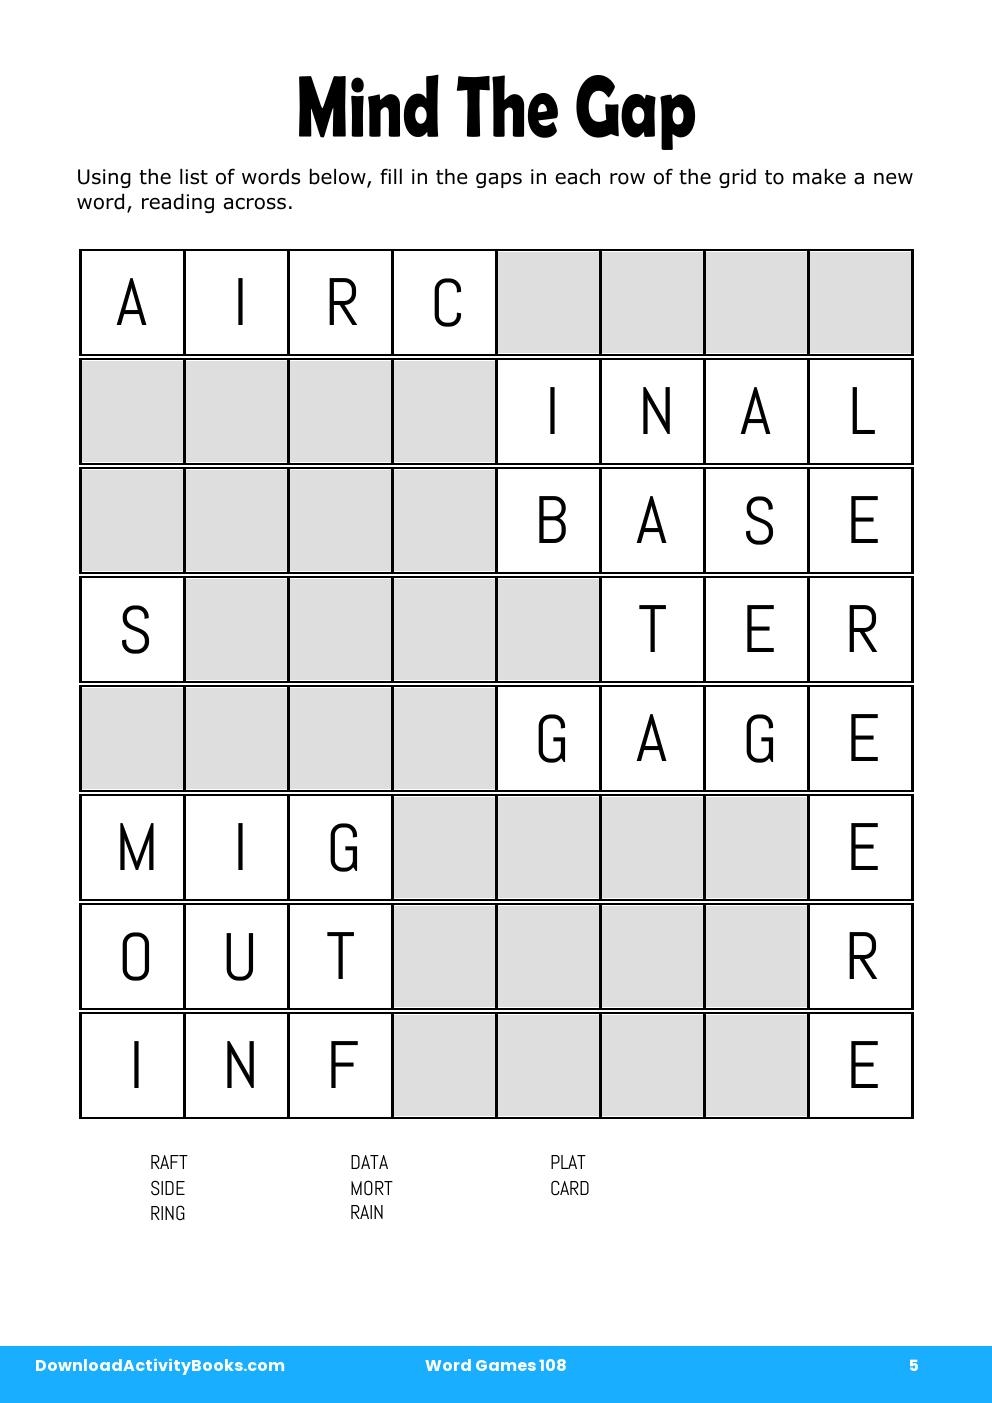 Mind The Gap in Word Games 108